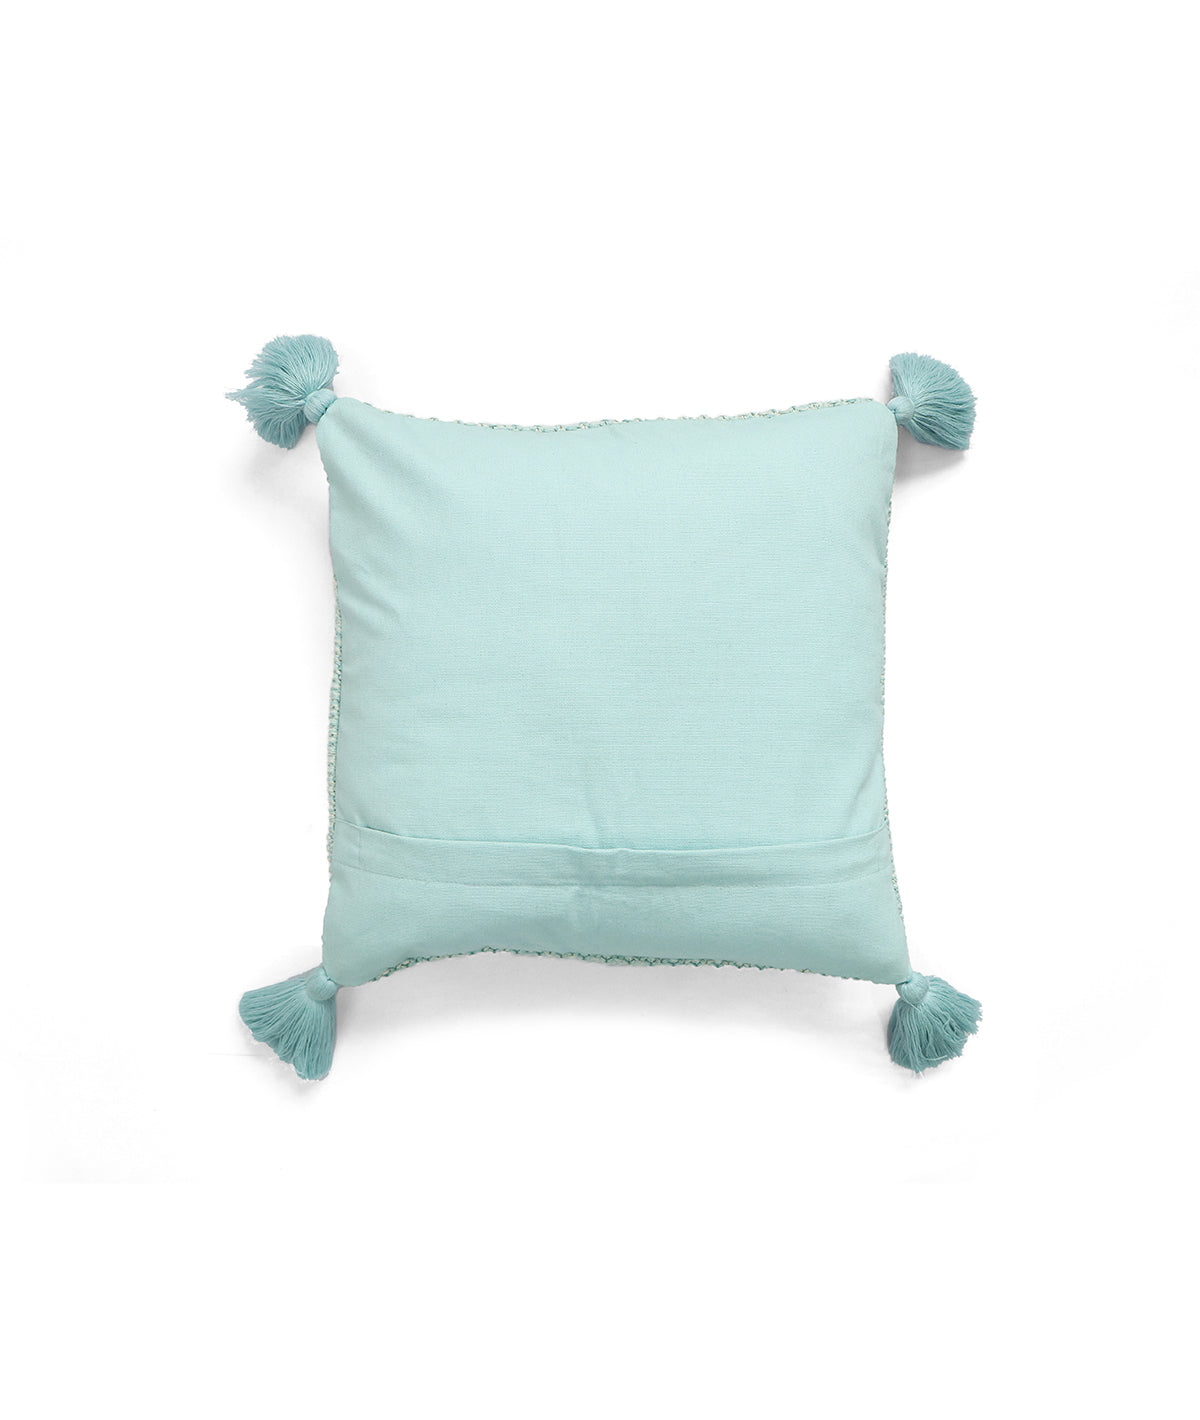 Moss knit Cotton Knitted Decorative Cushion Cover (Sky blue & Natural) (16" x 16")